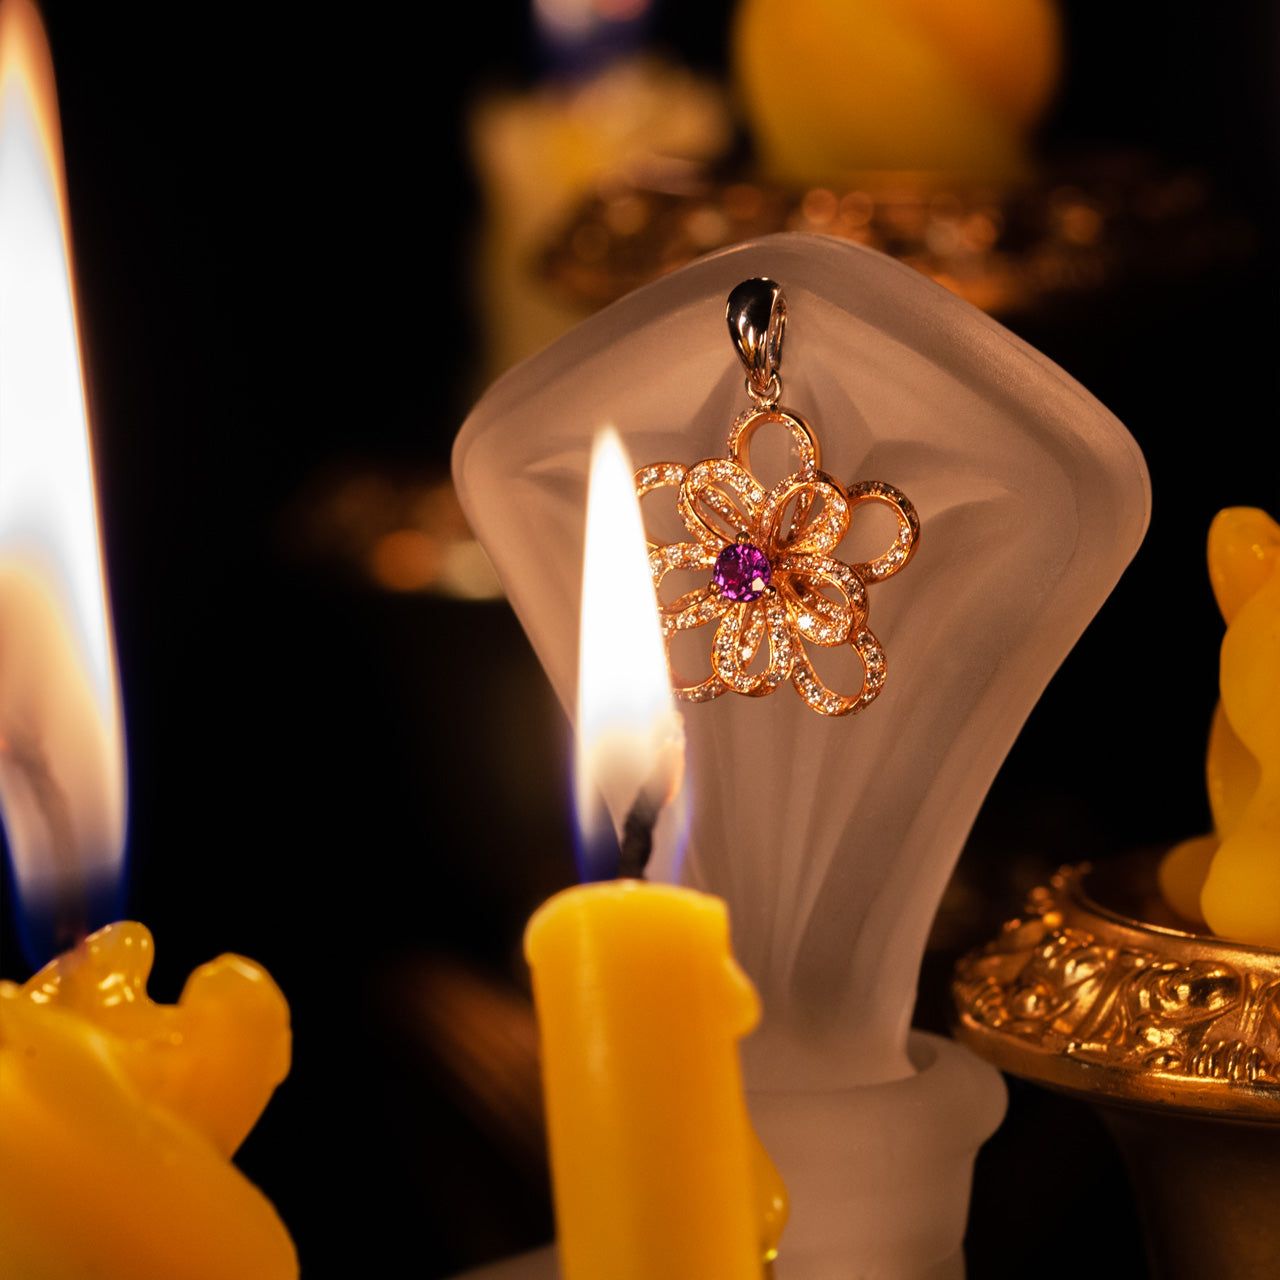 The 0.18ct alexandrite pendant in 18k gold showcased with ambient candlelight in the background